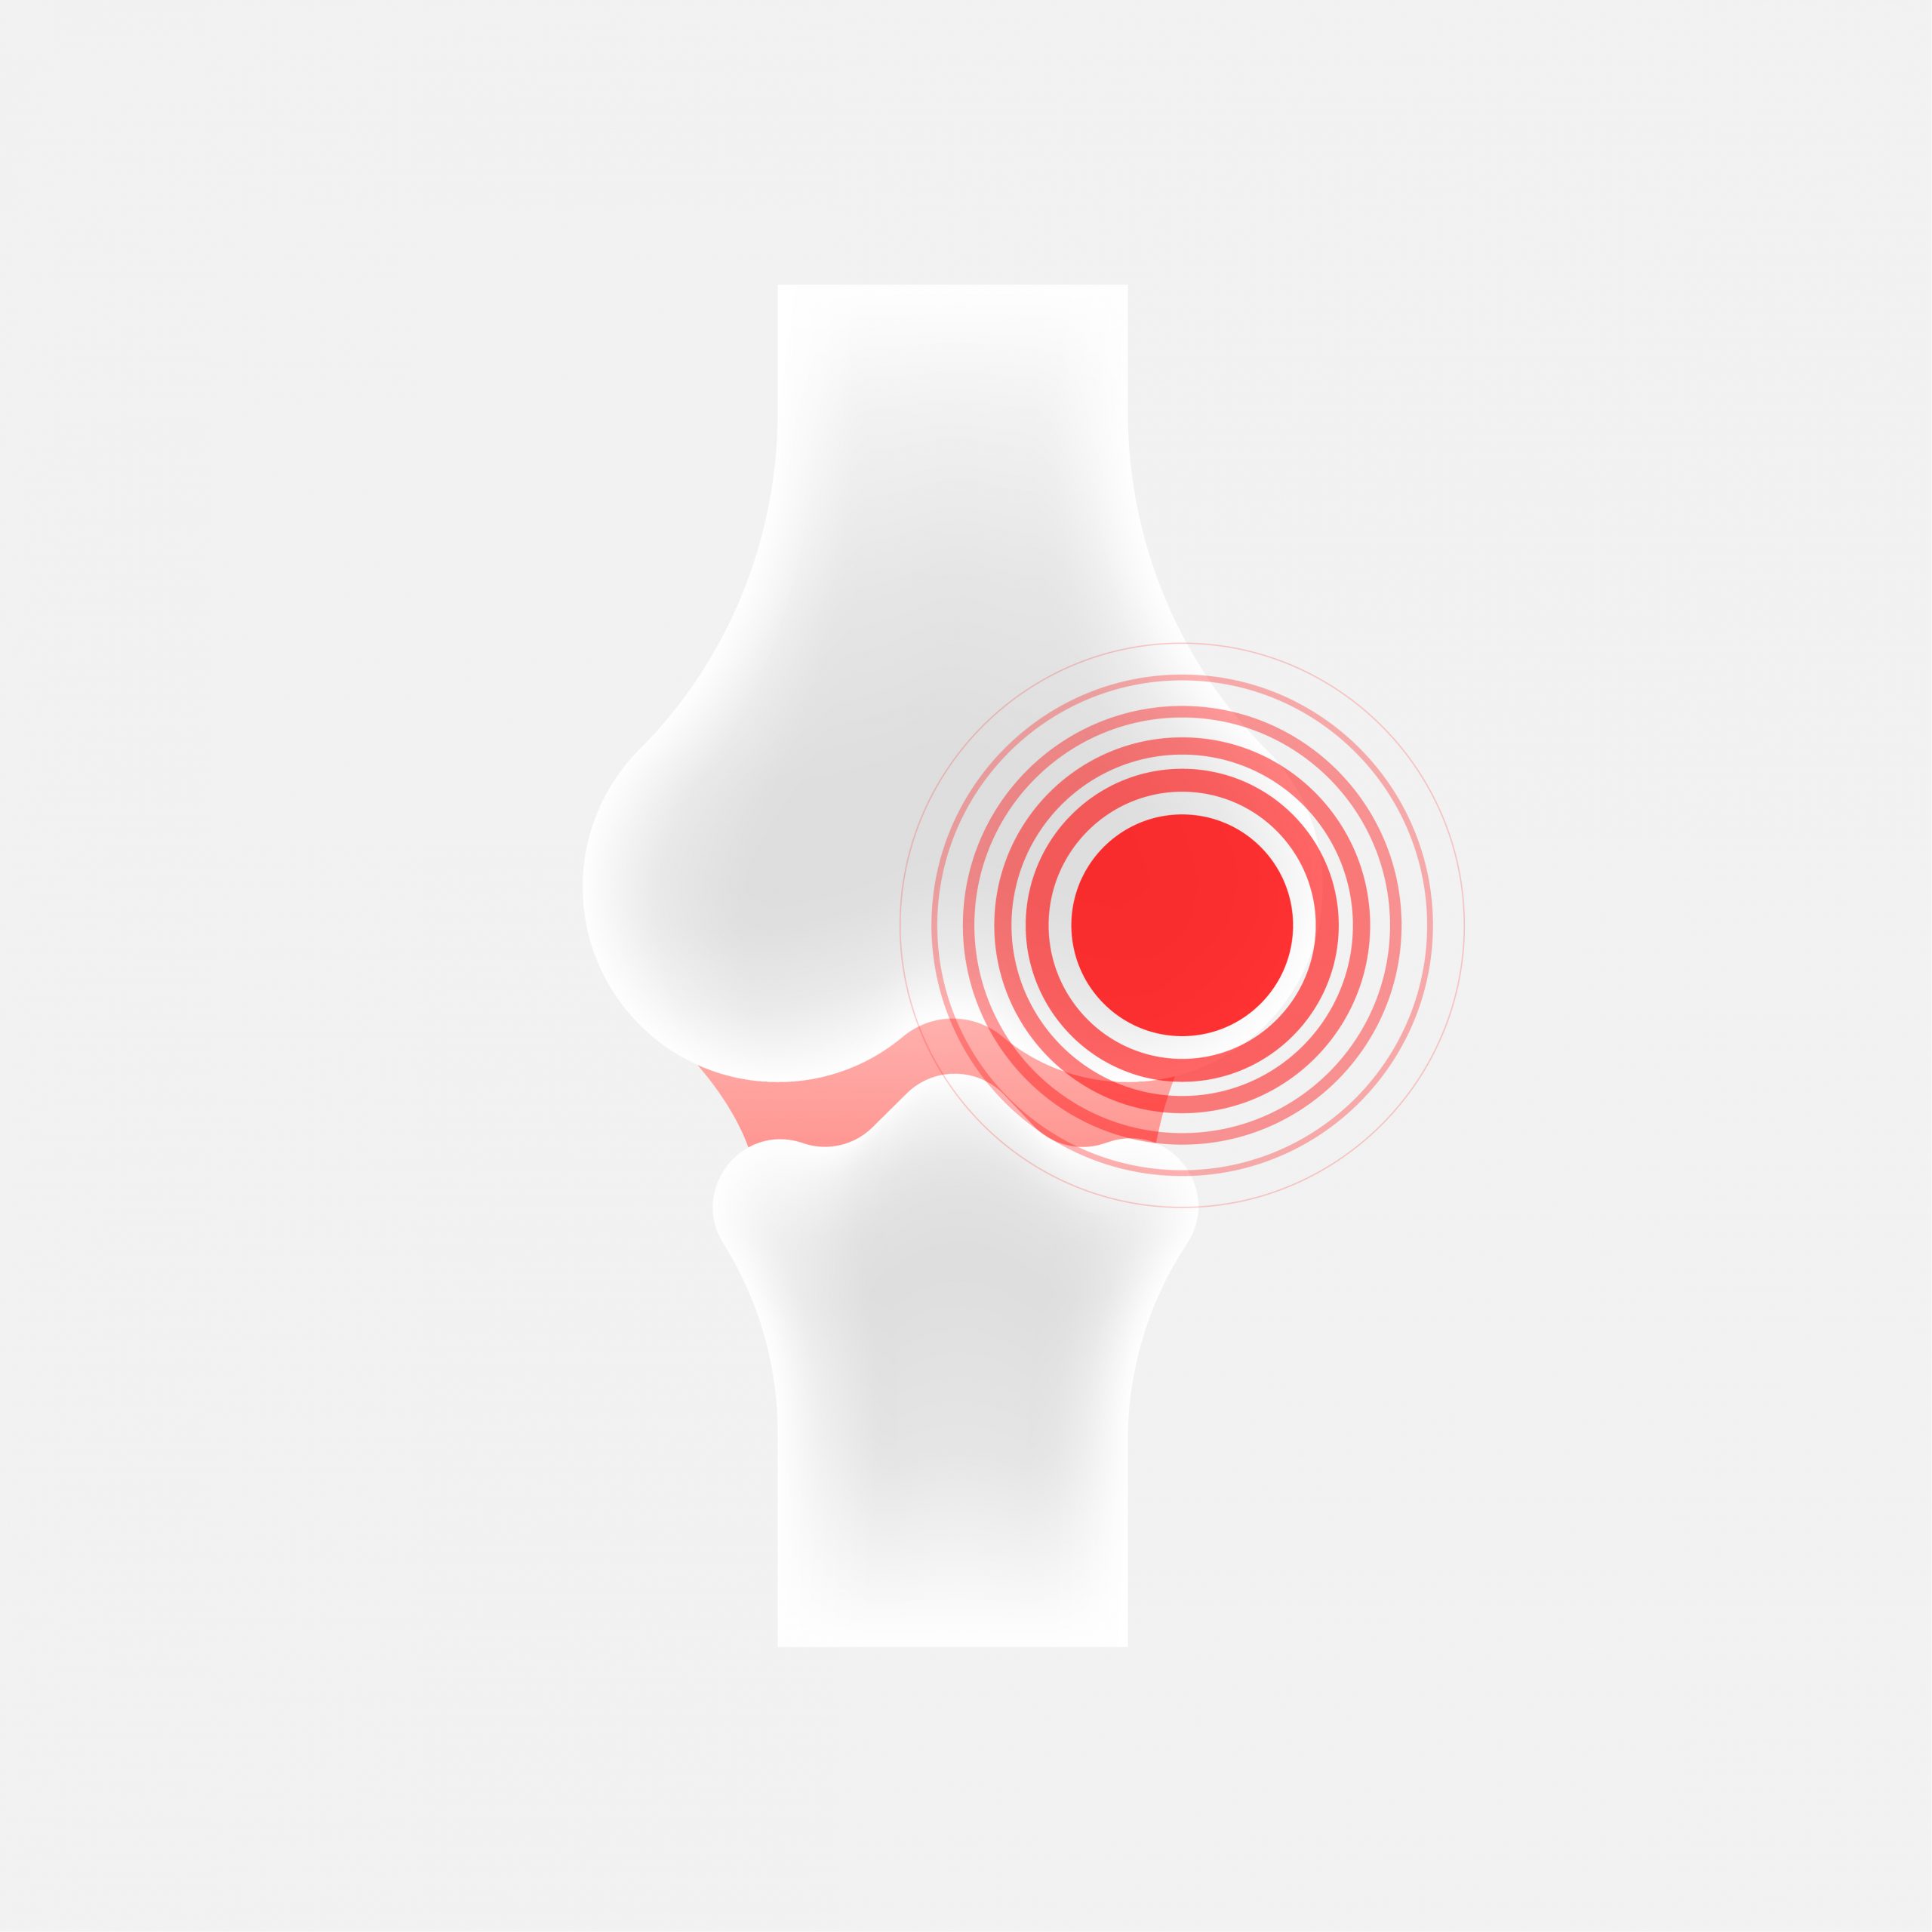 Infographic with joint pain. Human knee bone joint line icon